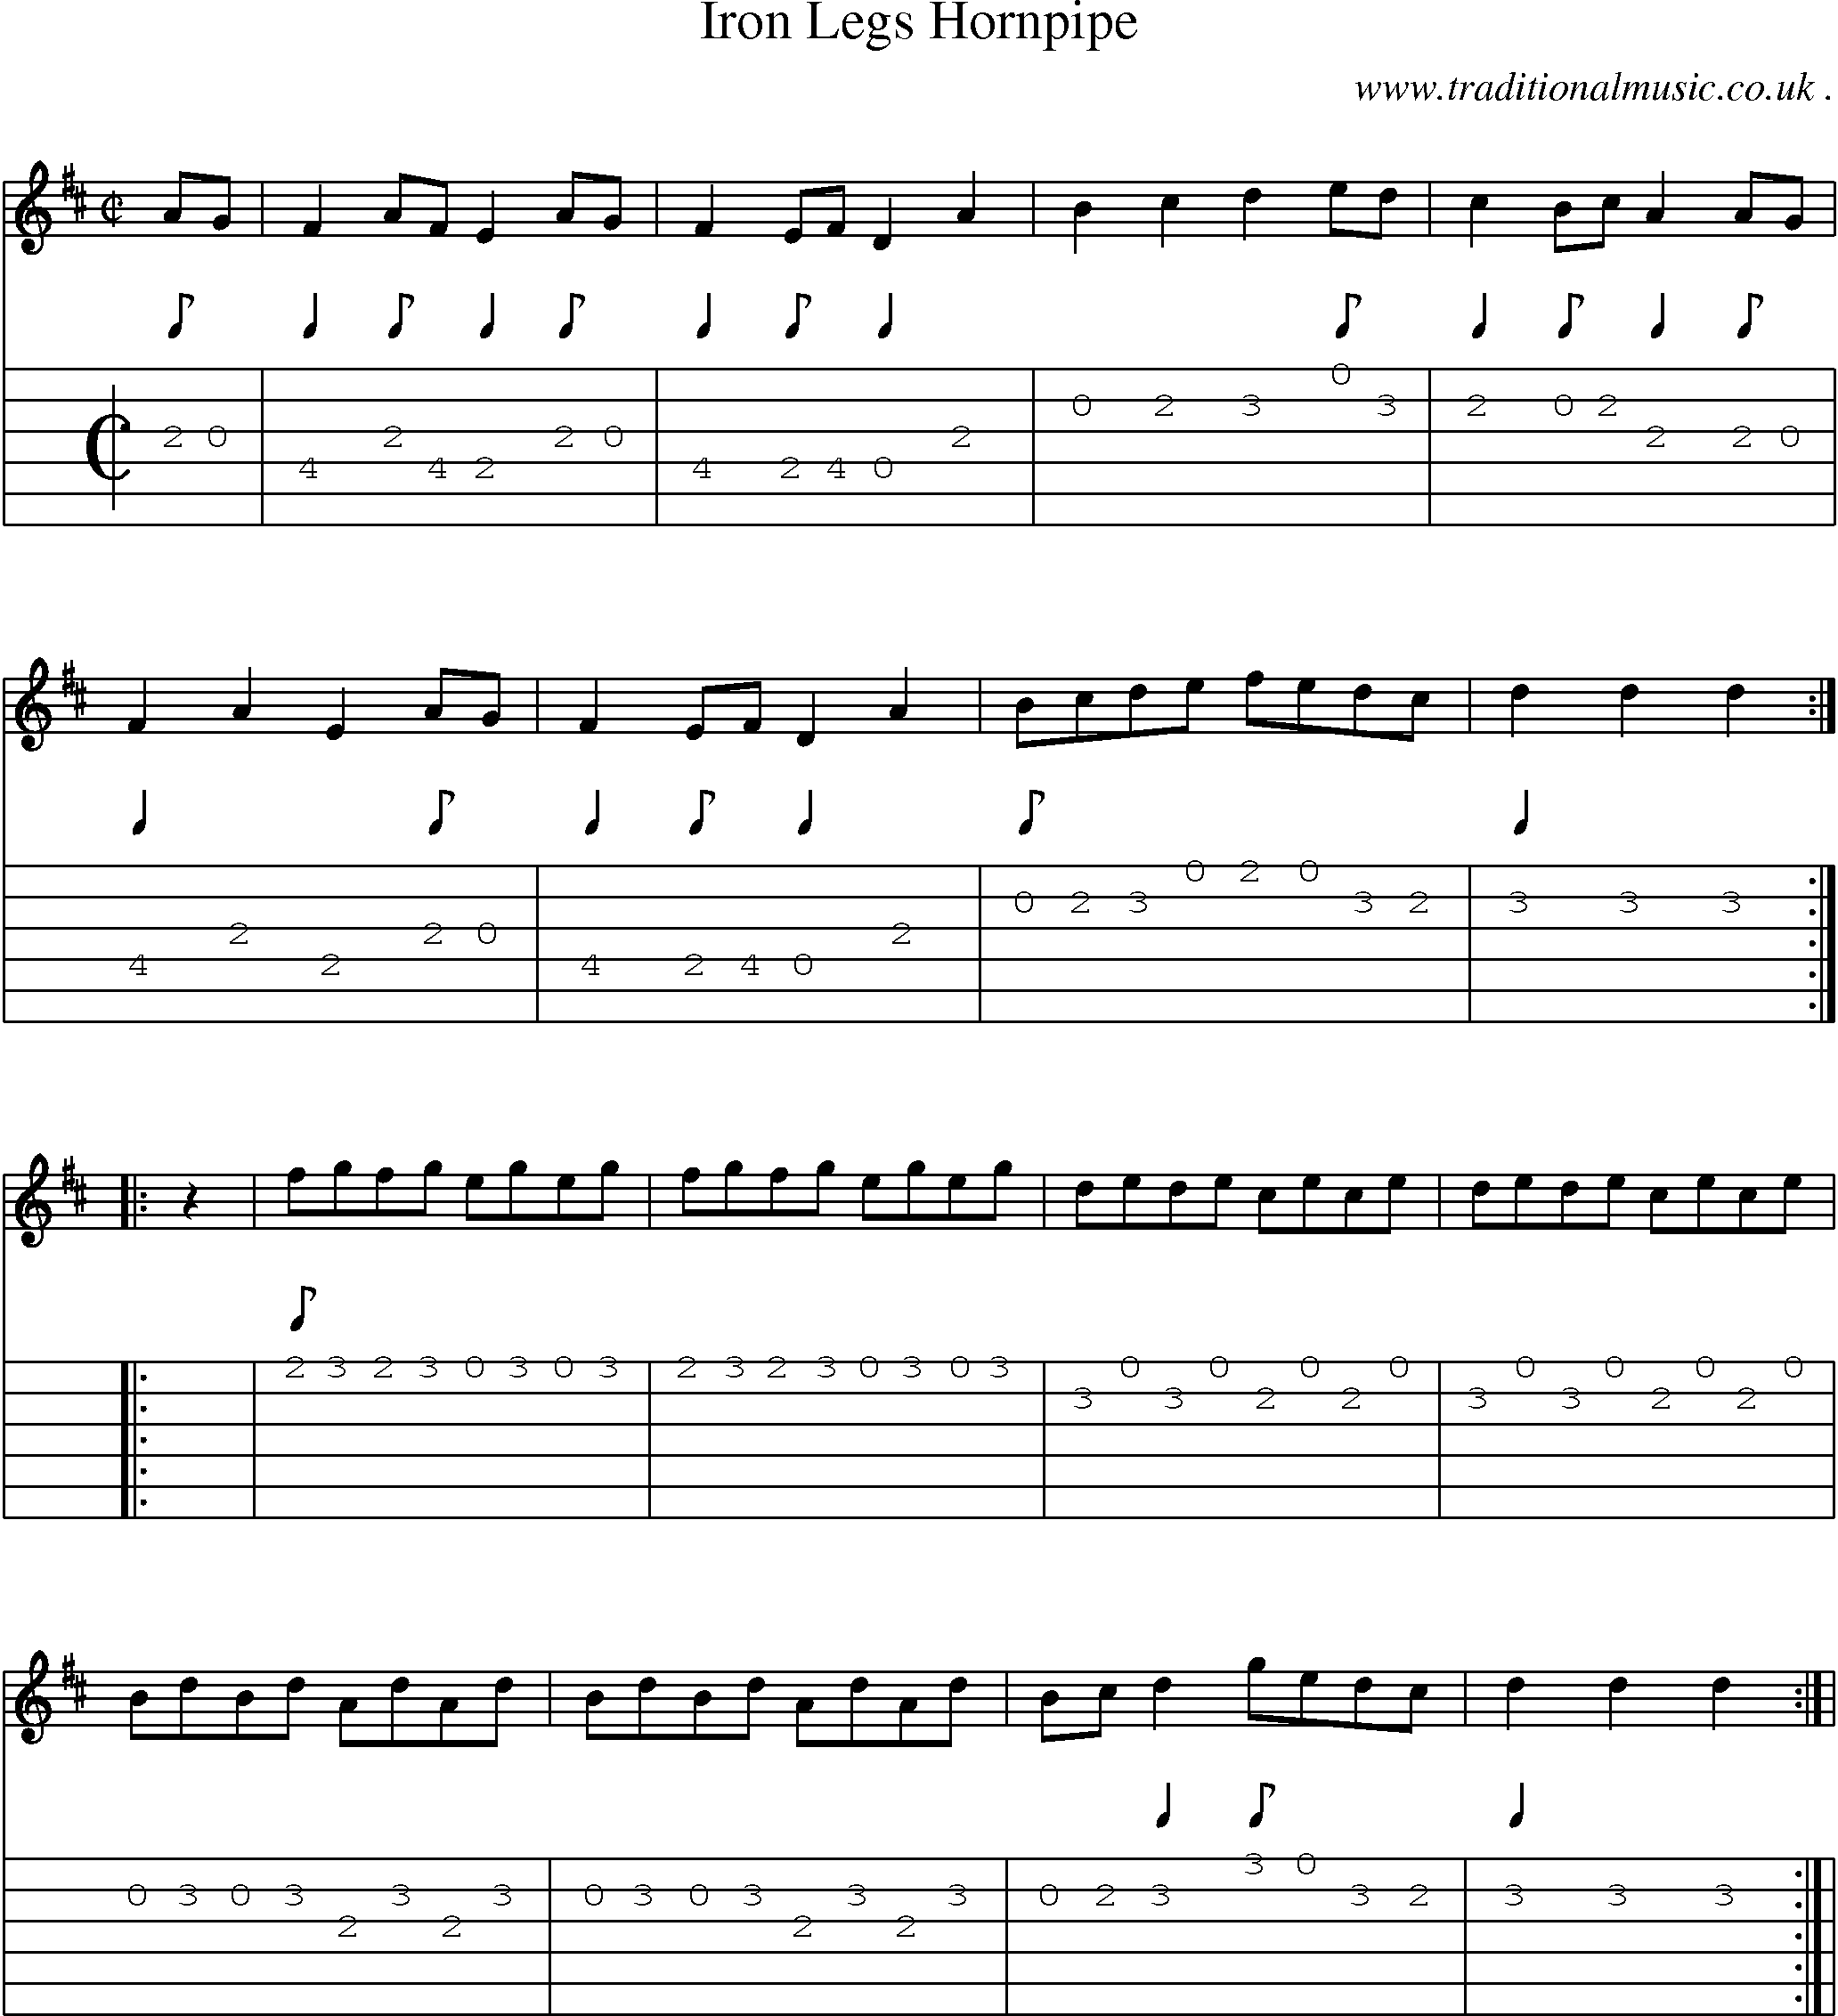 Sheet-Music and Guitar Tabs for Iron Legs Hornpipe